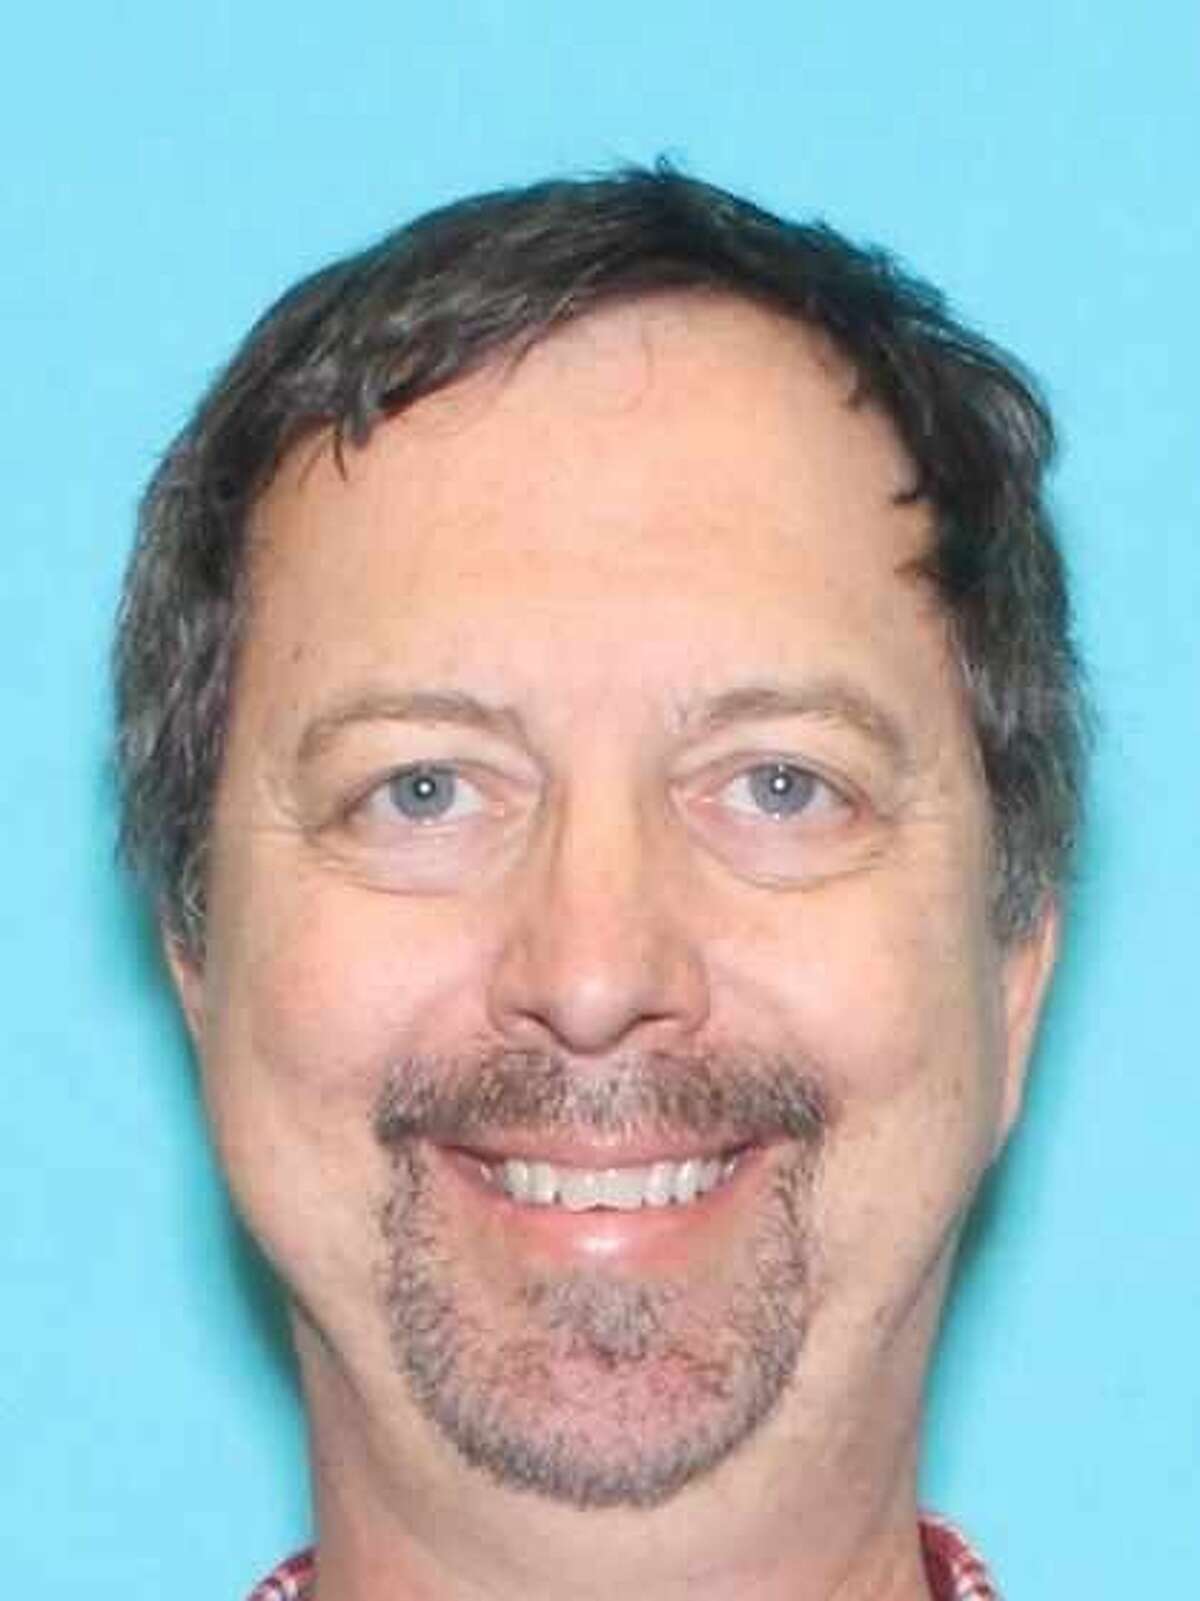 Former Canyon Middle School band director David Gunn was arrested Wednesday on a charge of sexual assault of a child, according to the New Braunfels Police Department.